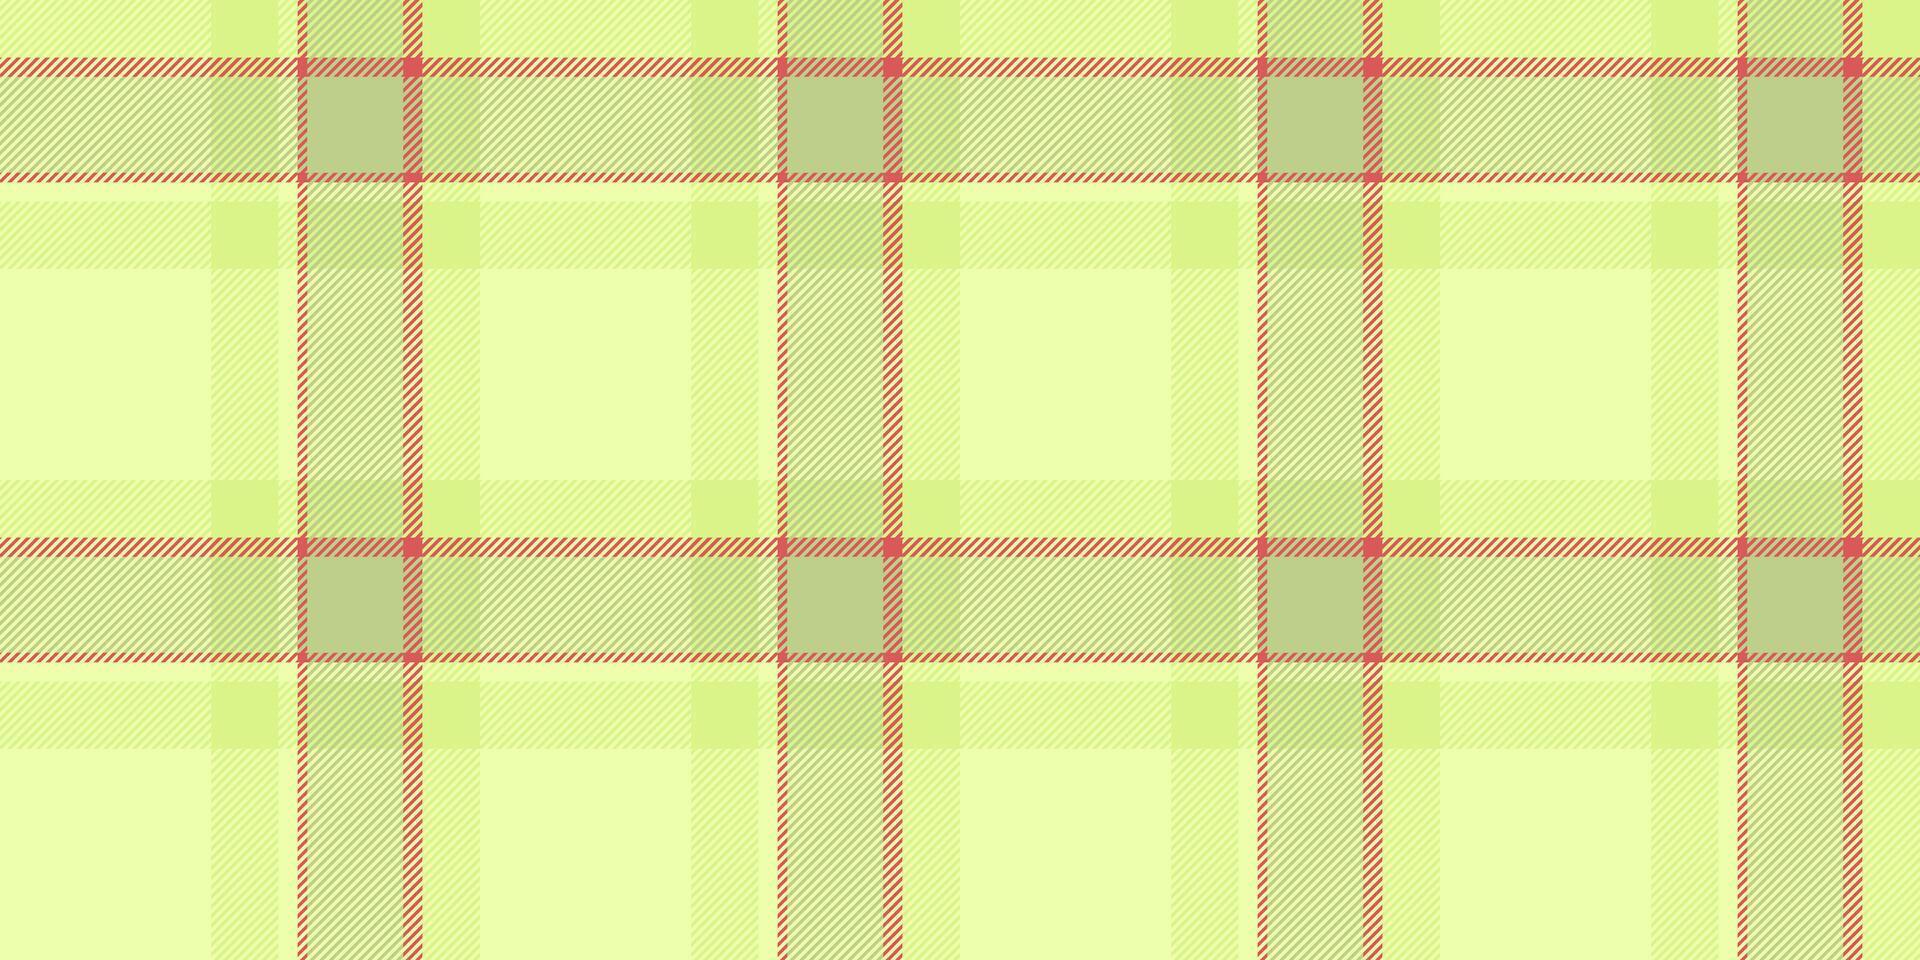 Kitchen background tartan fabric, free textile pattern plaid. Detailed texture seamless check vector in lime and red colors.